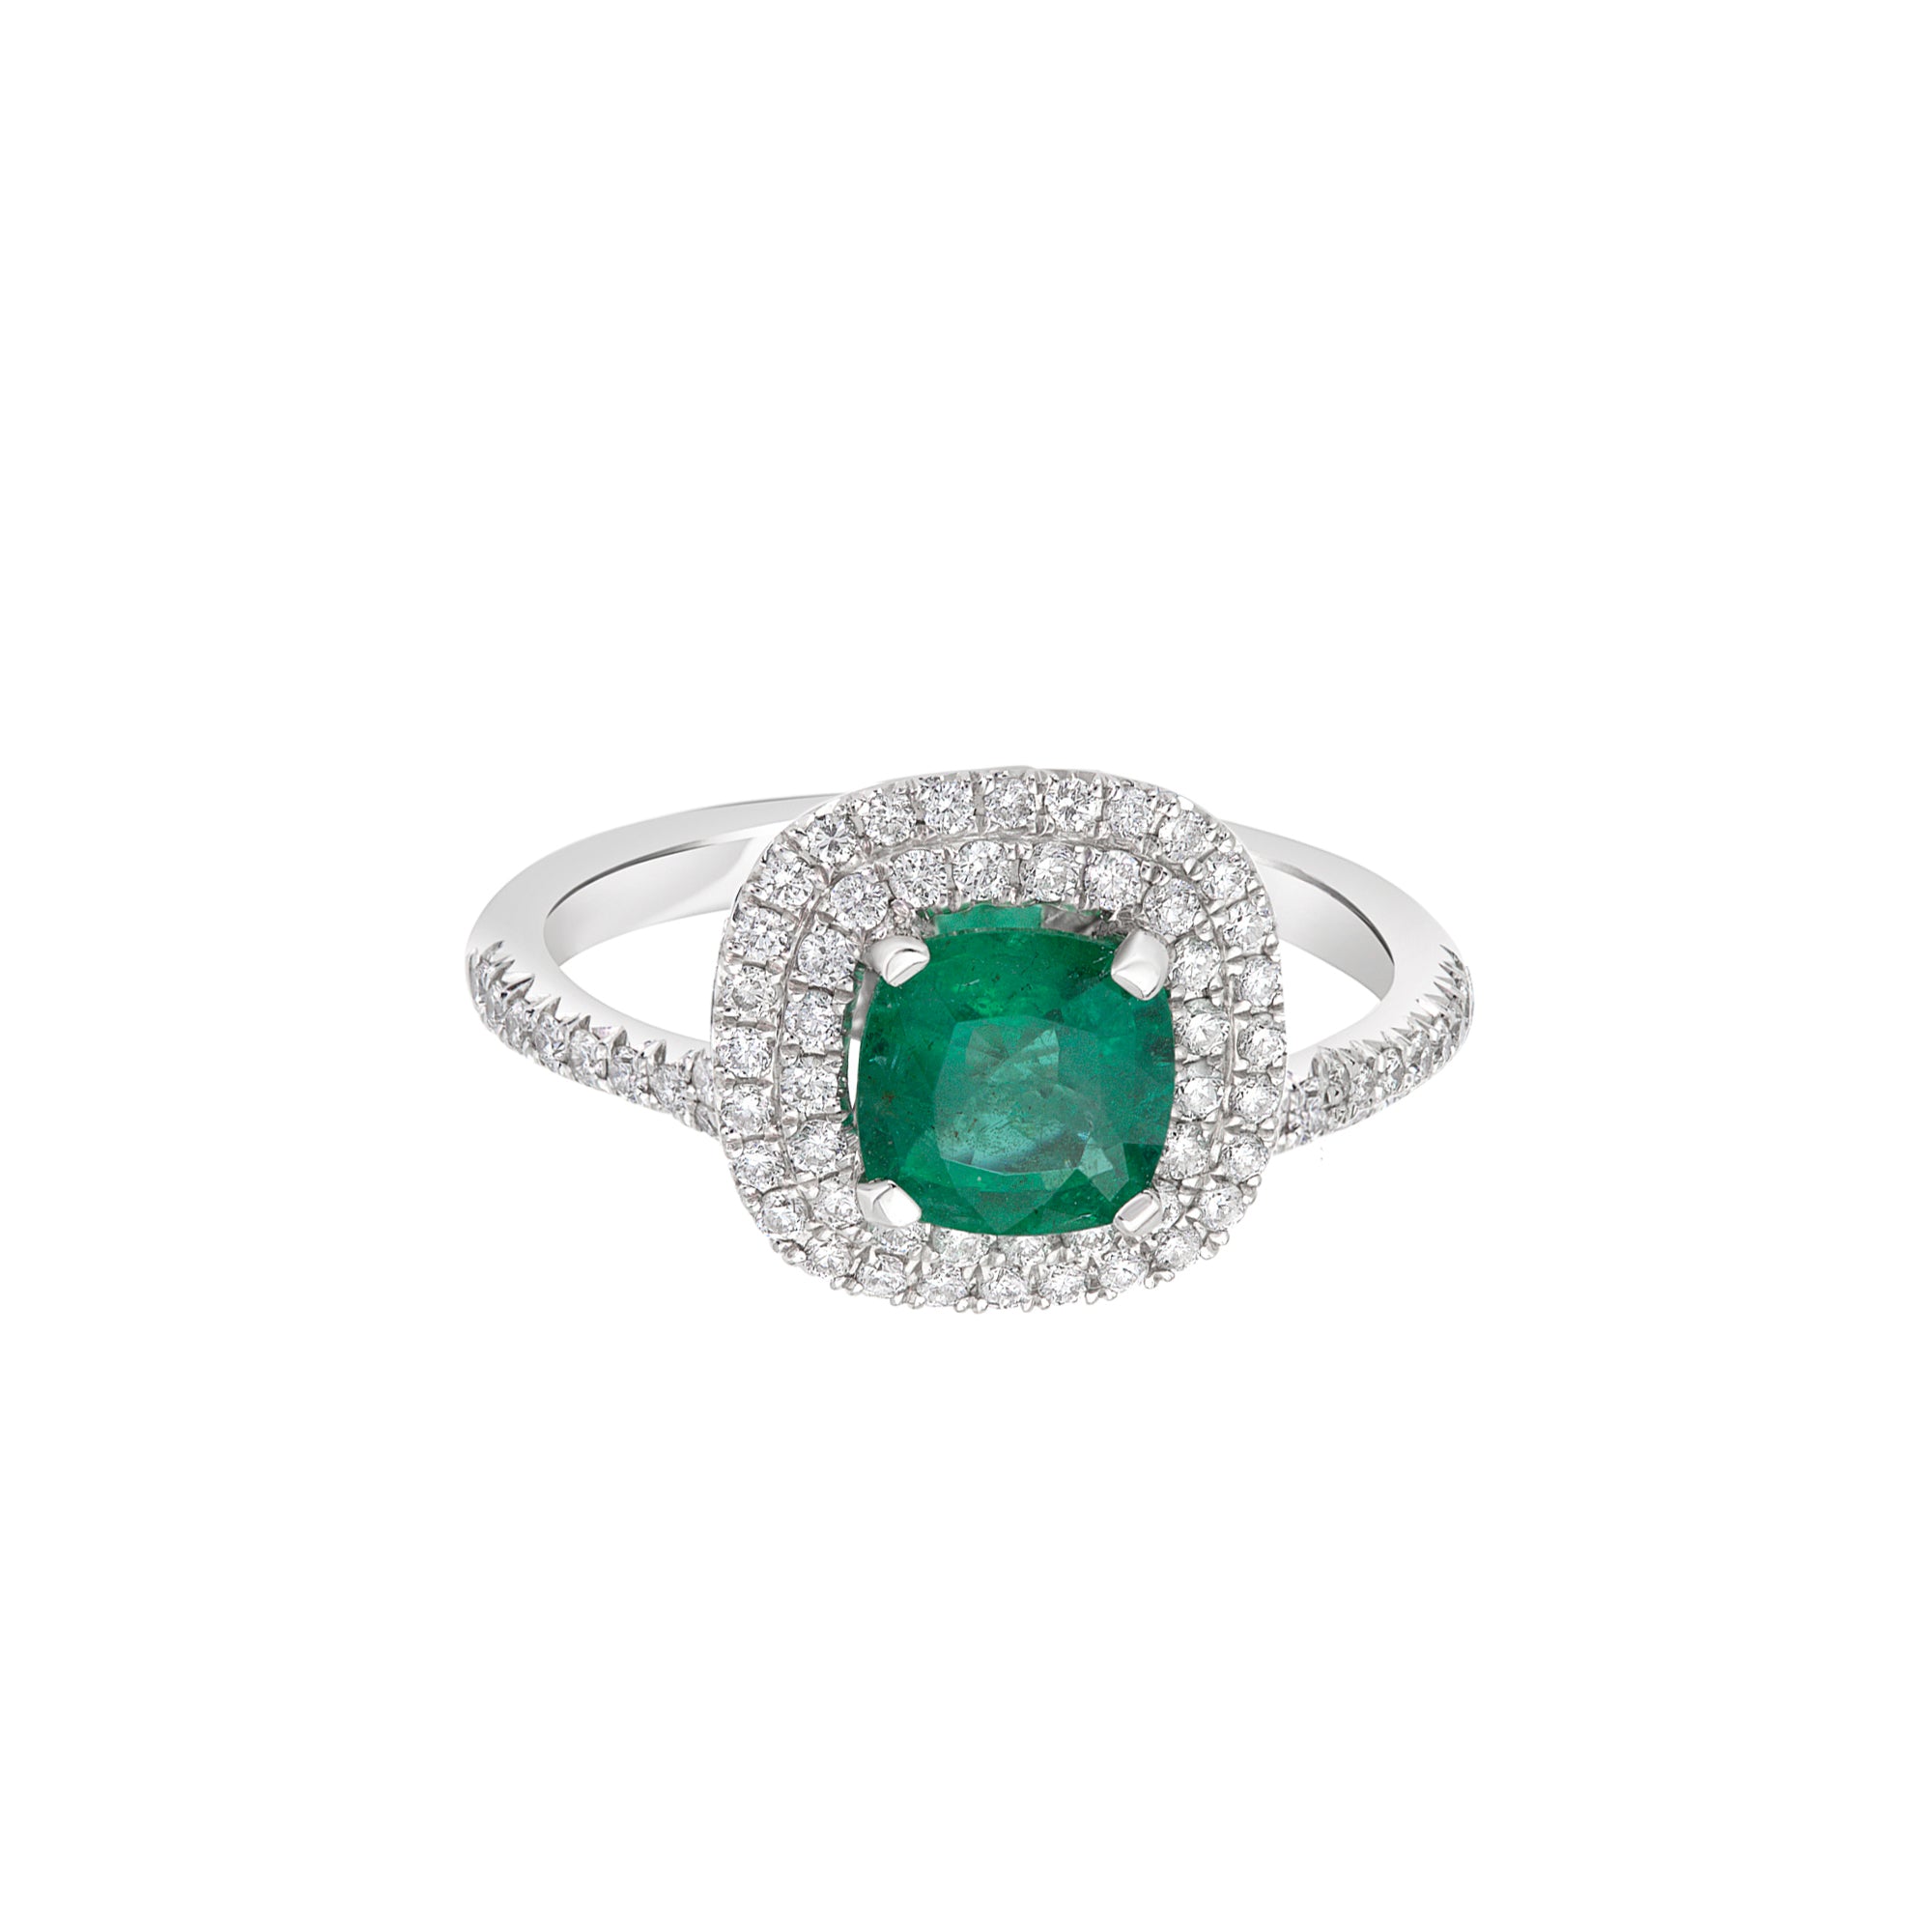 Emerald Double Halo Ring - 1.35ct TW